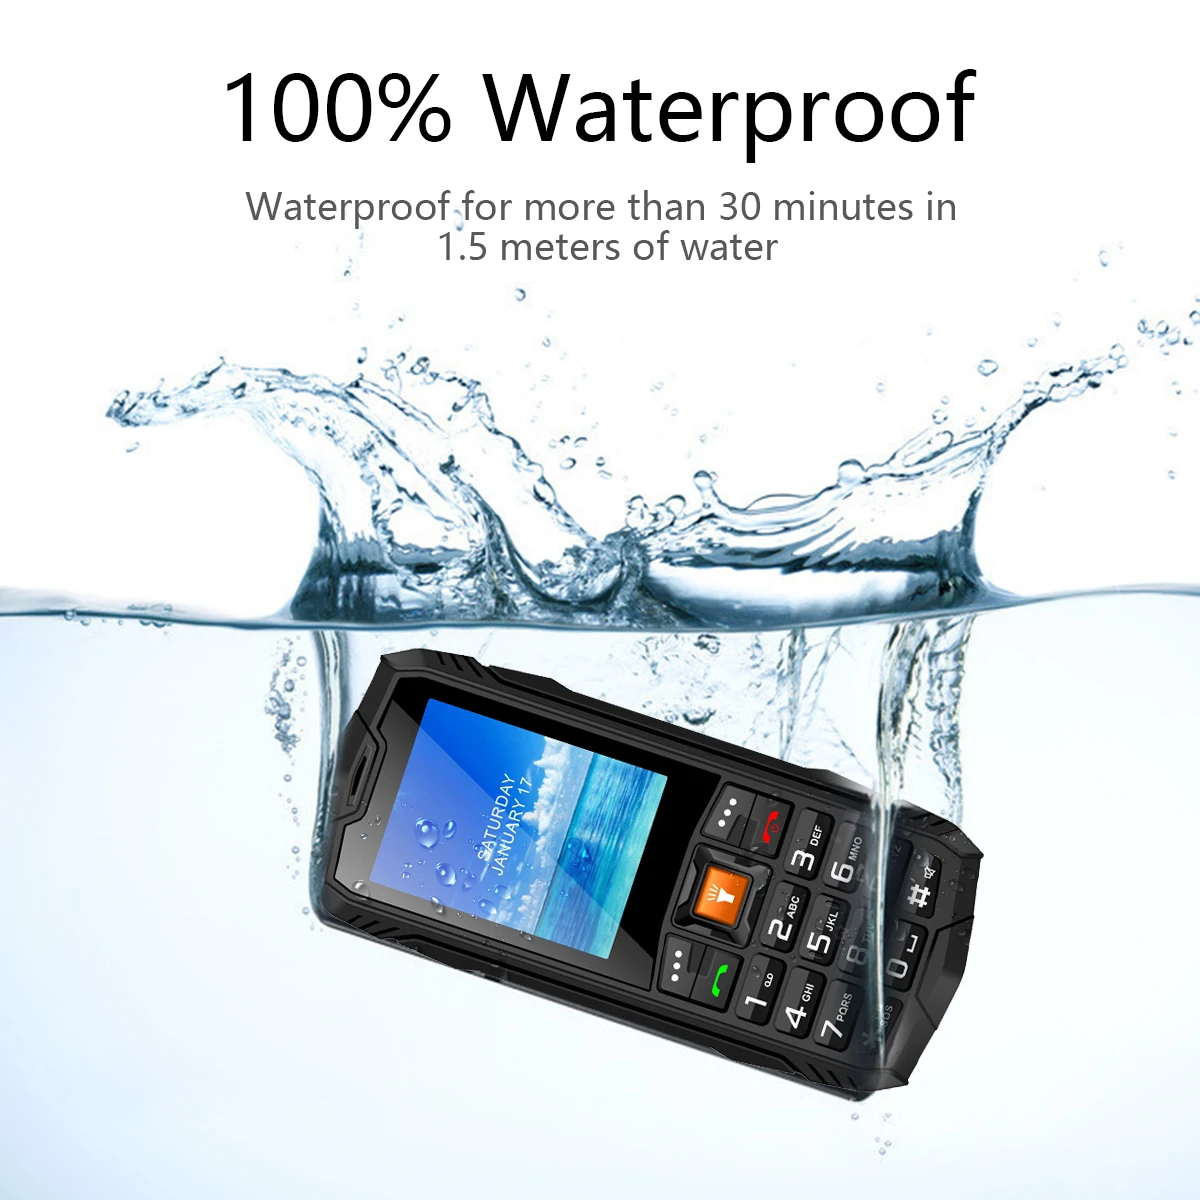 eaor ip68 waterproof dustproof mobile phone big battery rugged phone dual 4g lte outdoor feature phone with glare flashlight free global shipping